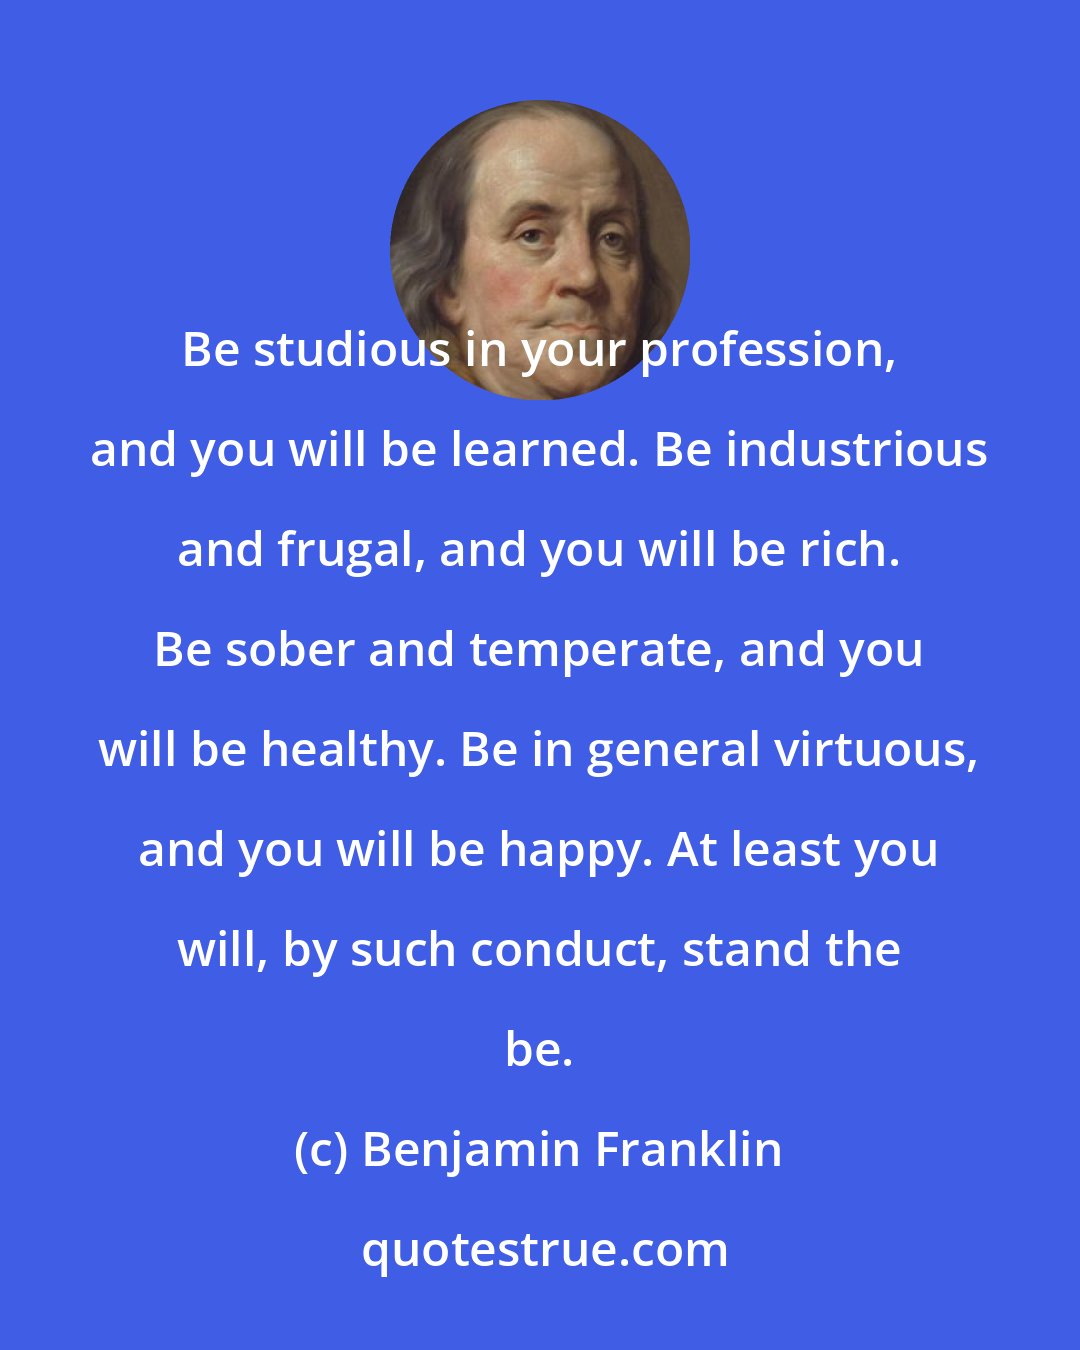 Benjamin Franklin: Be studious in your profession, and you will be learned. Be industrious and frugal, and you will be rich. Be sober and temperate, and you will be healthy. Be in general virtuous, and you will be happy. At least you will, by such conduct, stand the be.